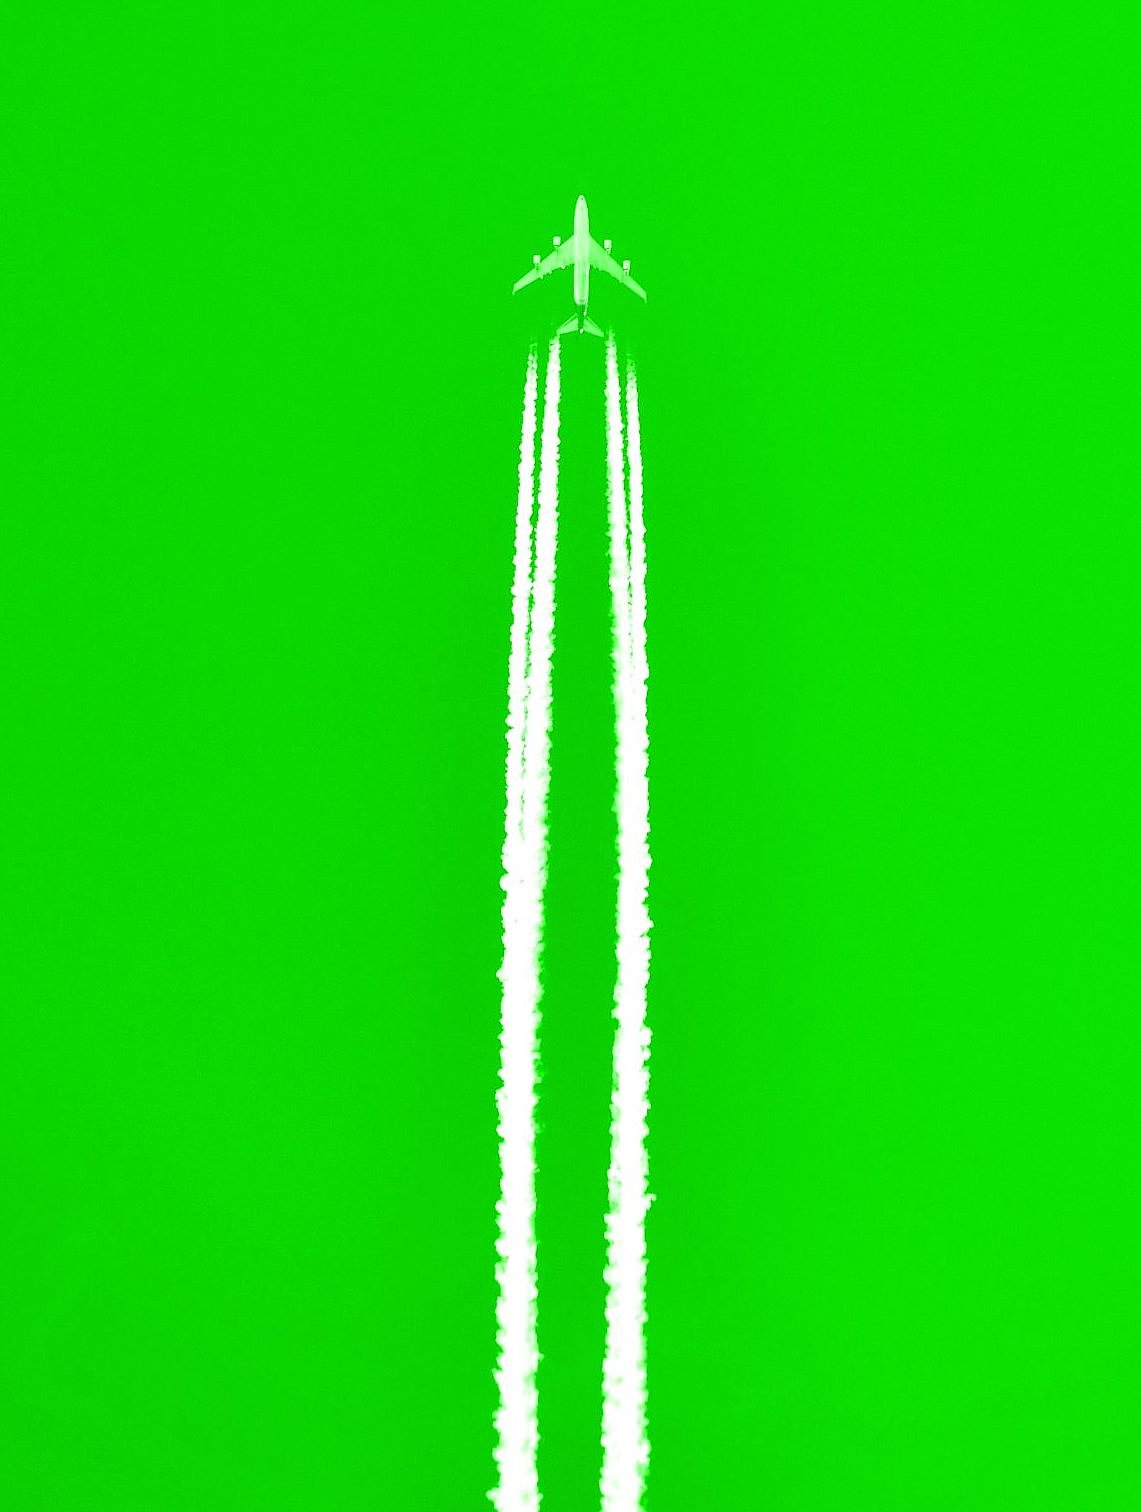 Aircraft with condensation stripes on green background